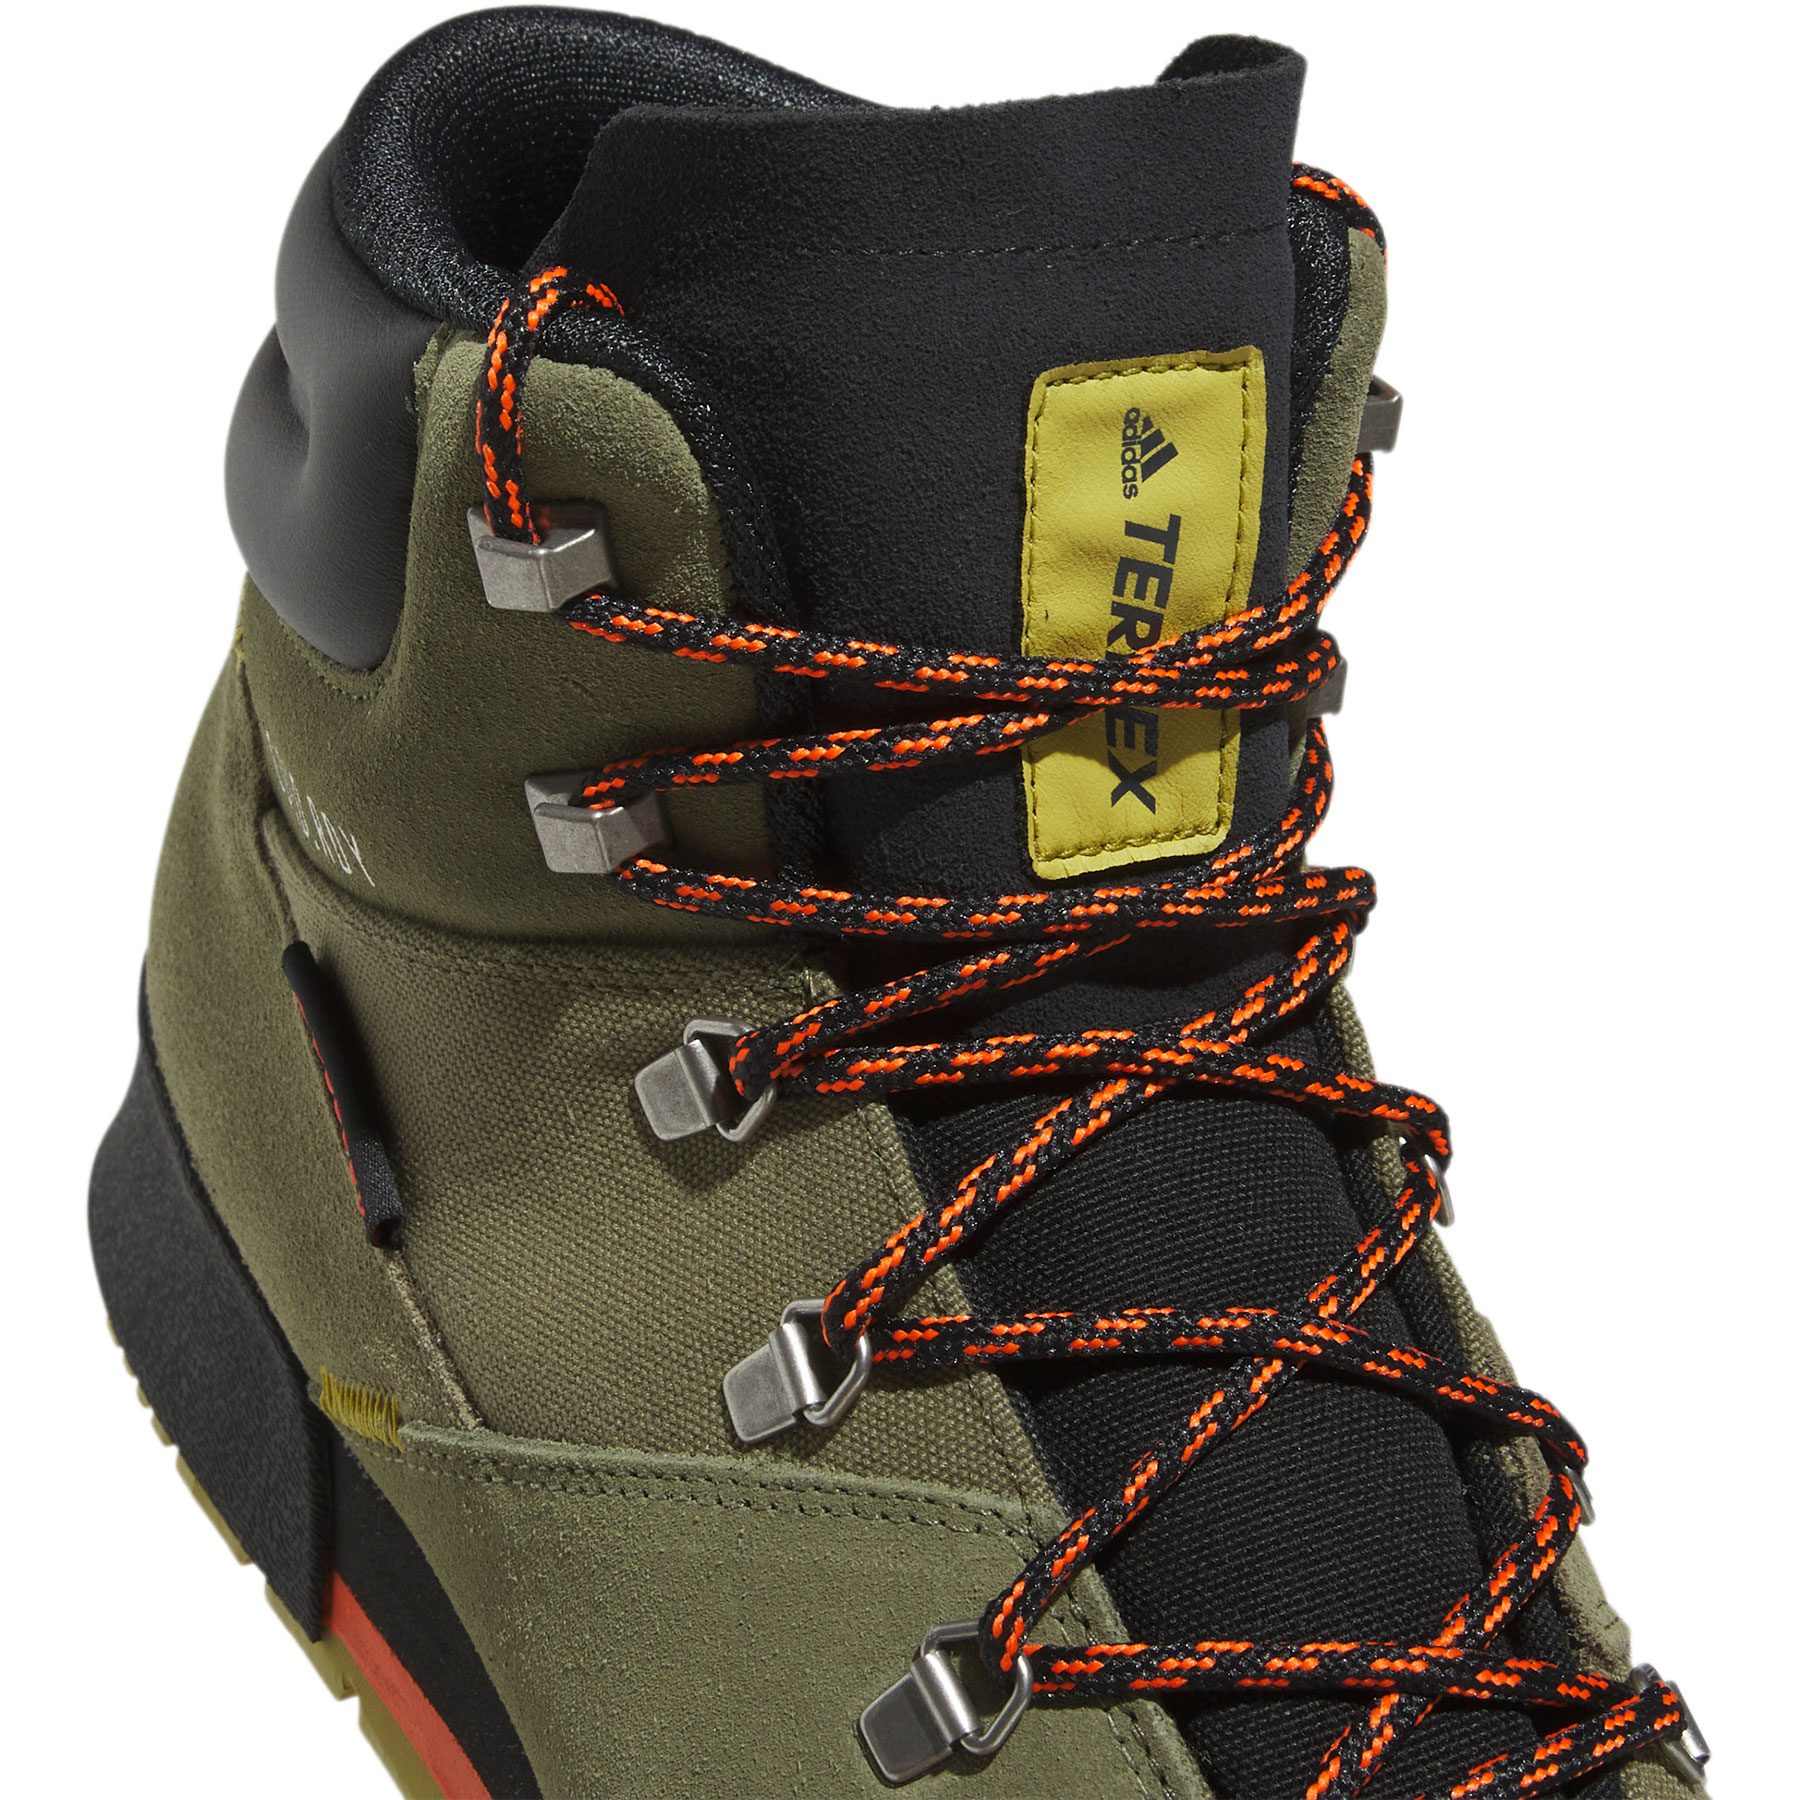 AVALANCHE Women's Pitch Mid Hiking Boots - Bob's Stores